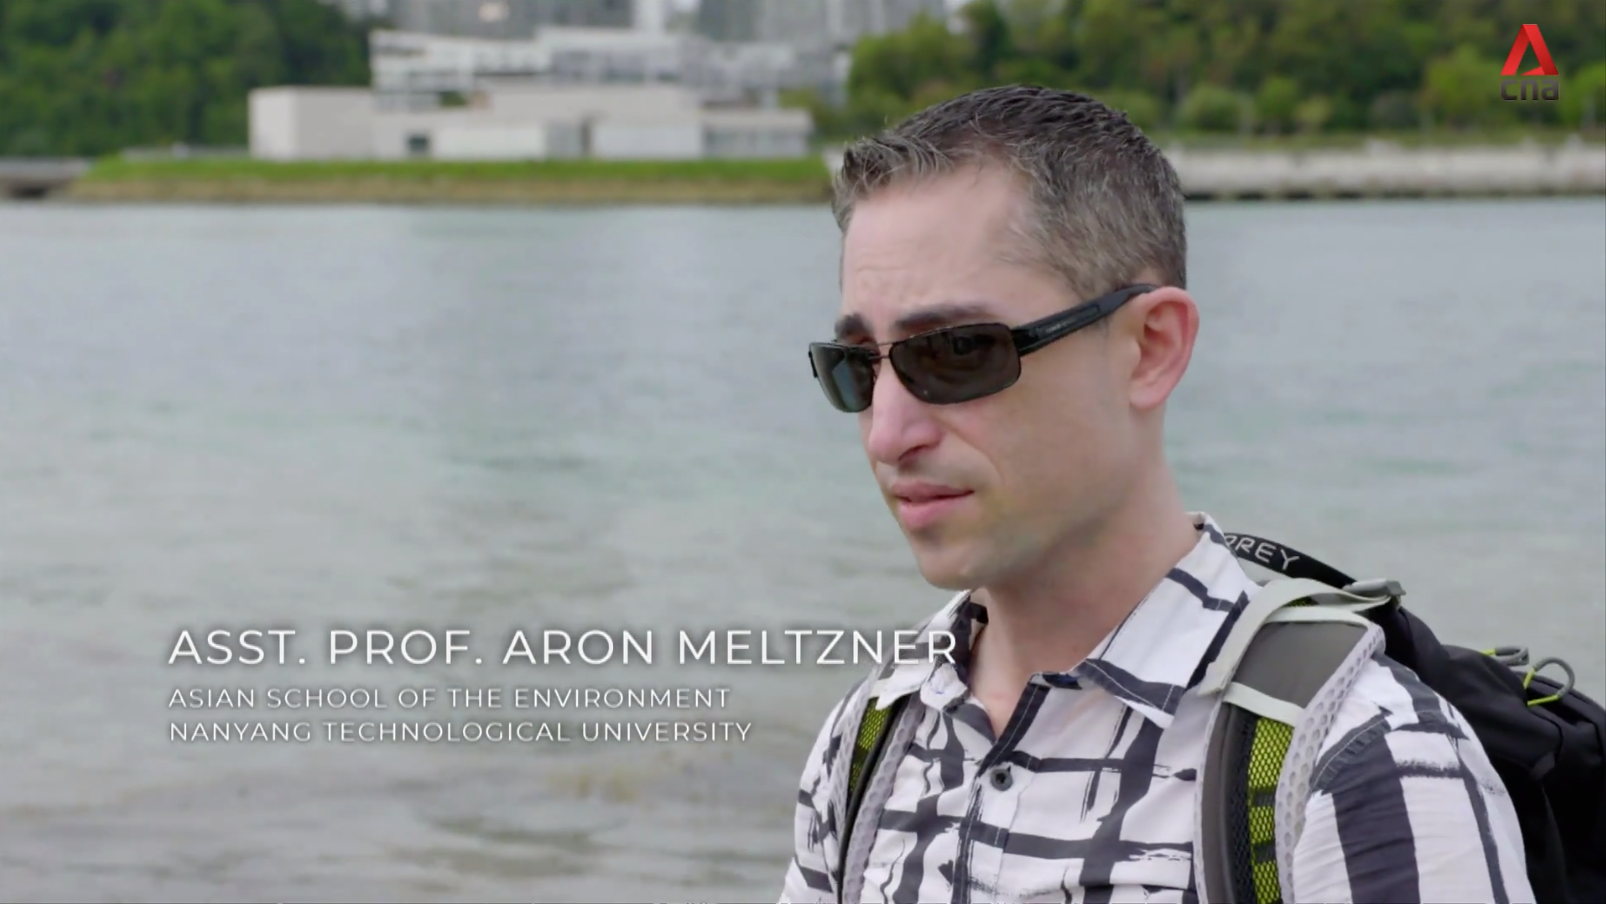 Asst. Prof Aron Meltzner, a Principal Investigator at the Earth Observatory of Singapore, explains rising sea levels could be exacerbated by climate change (Source: Channel NewsAsia)